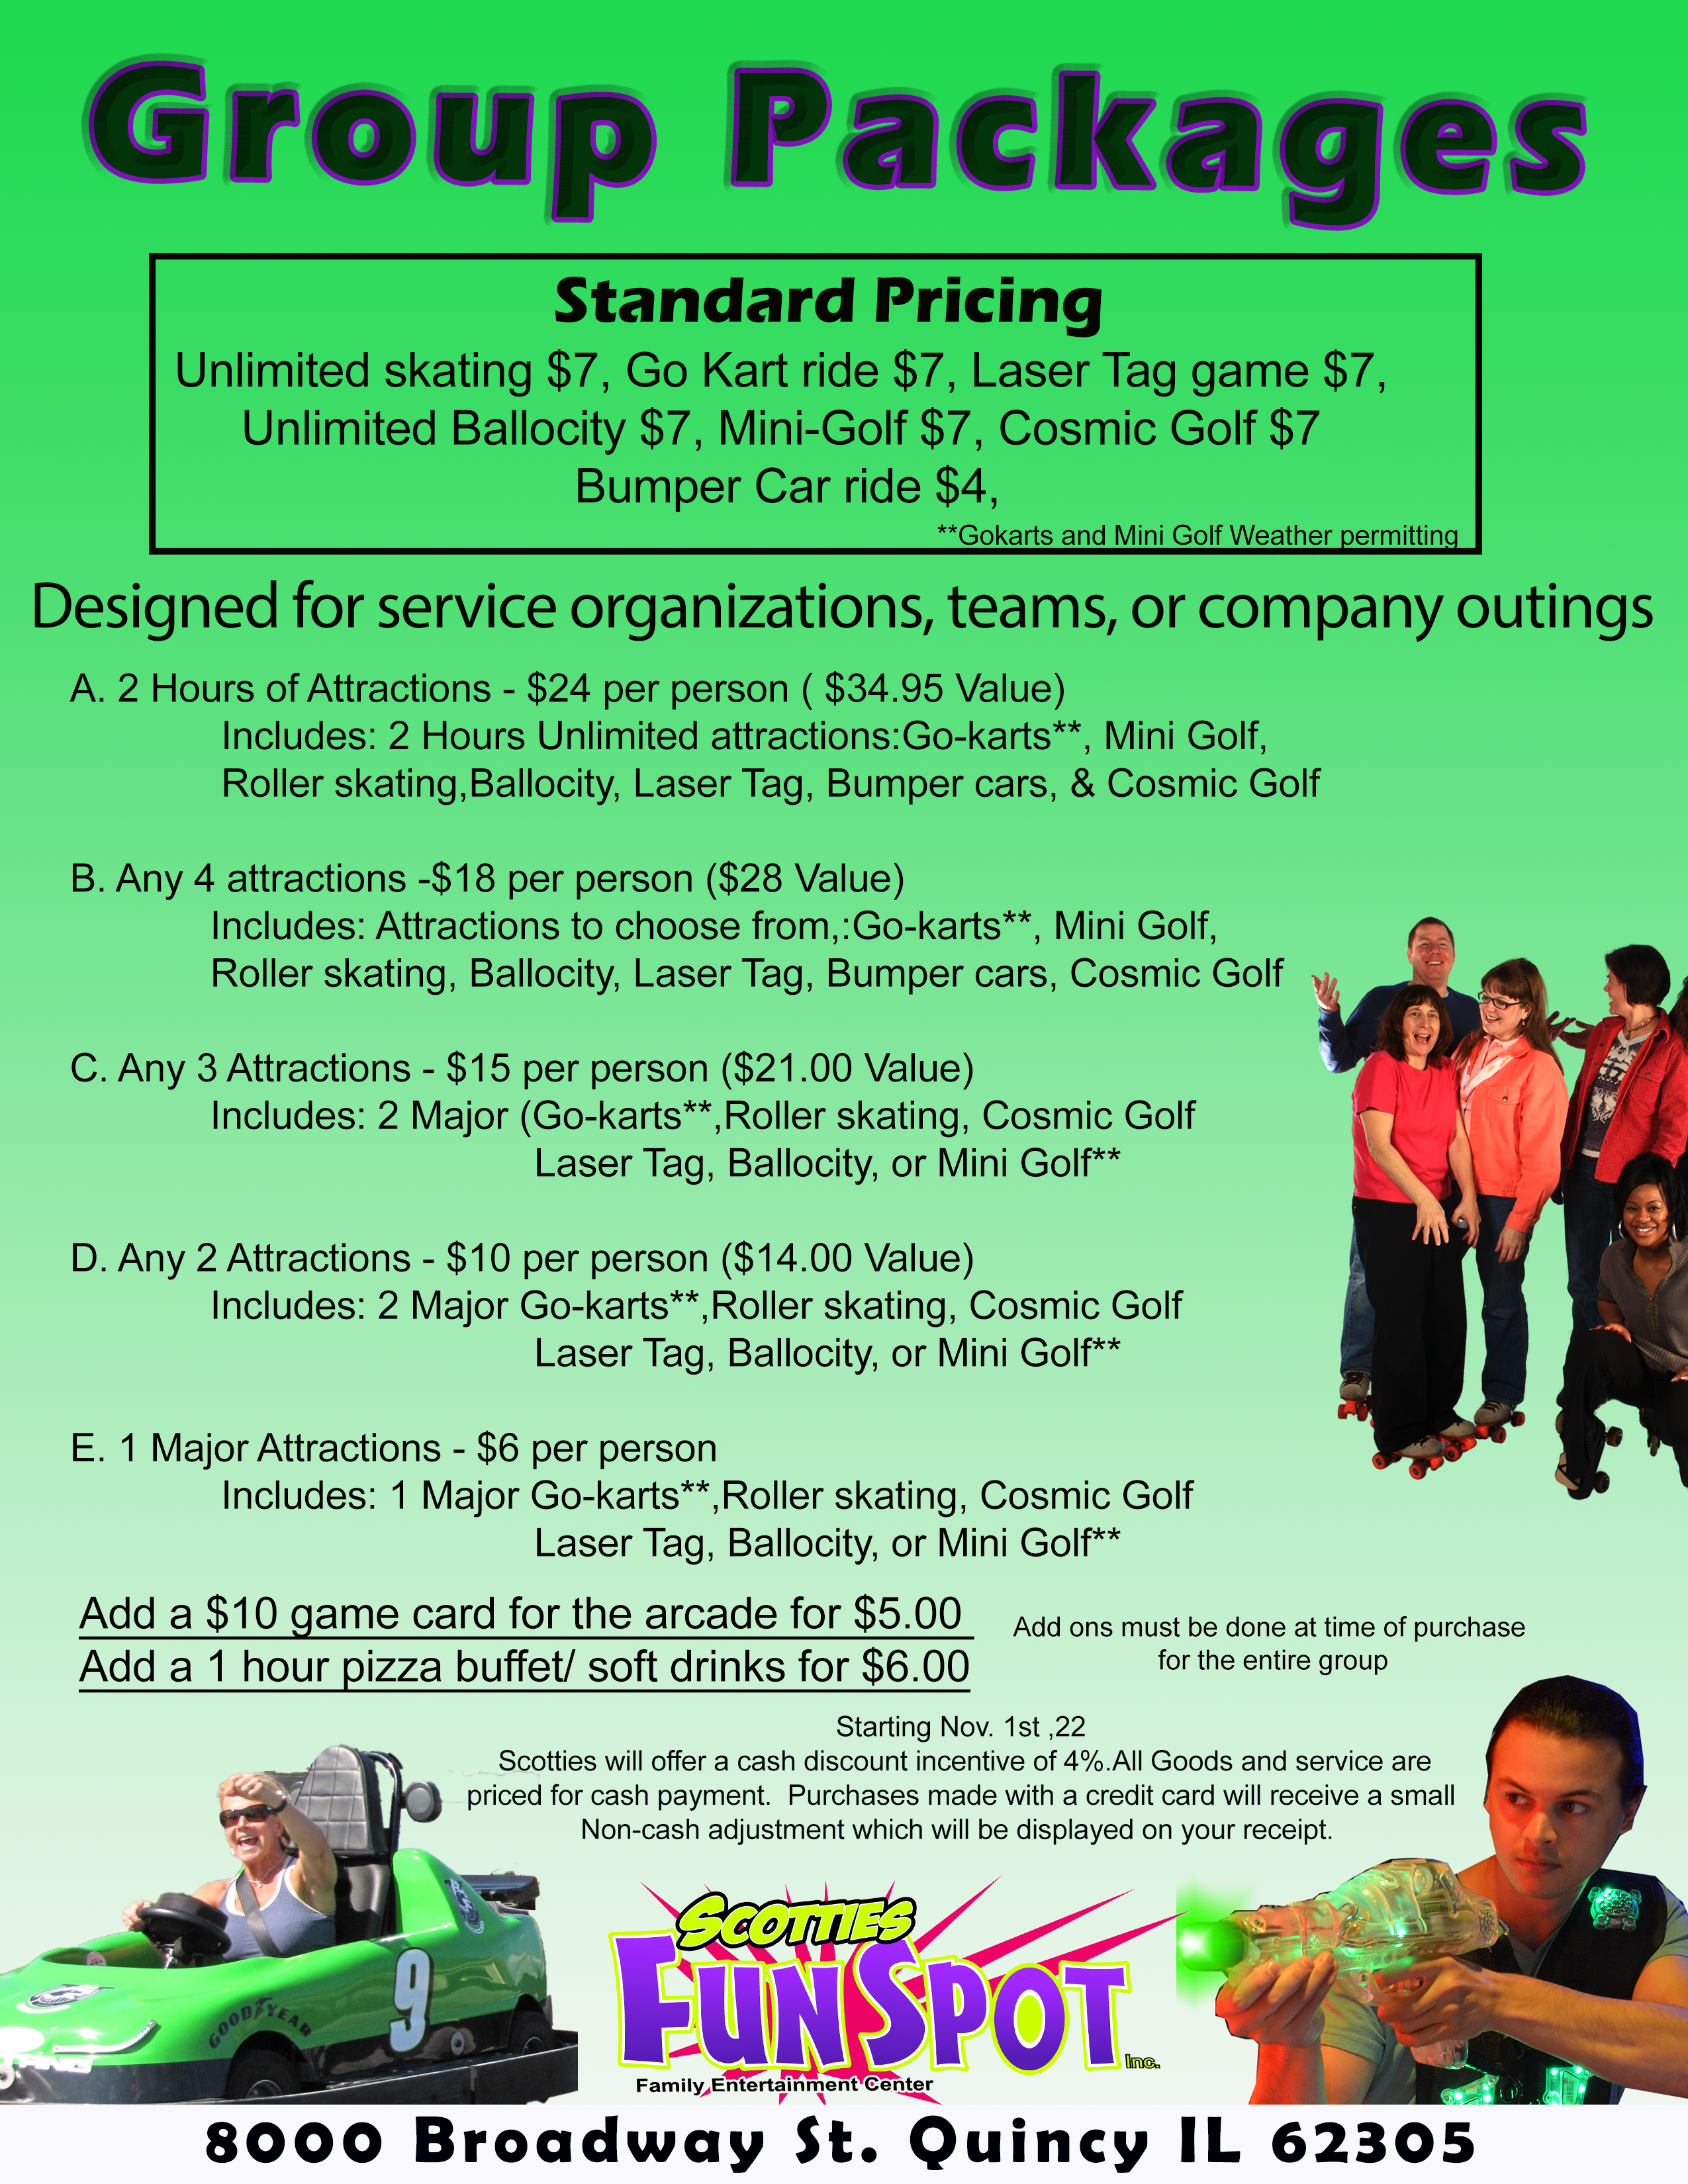 For service groups and company outings 